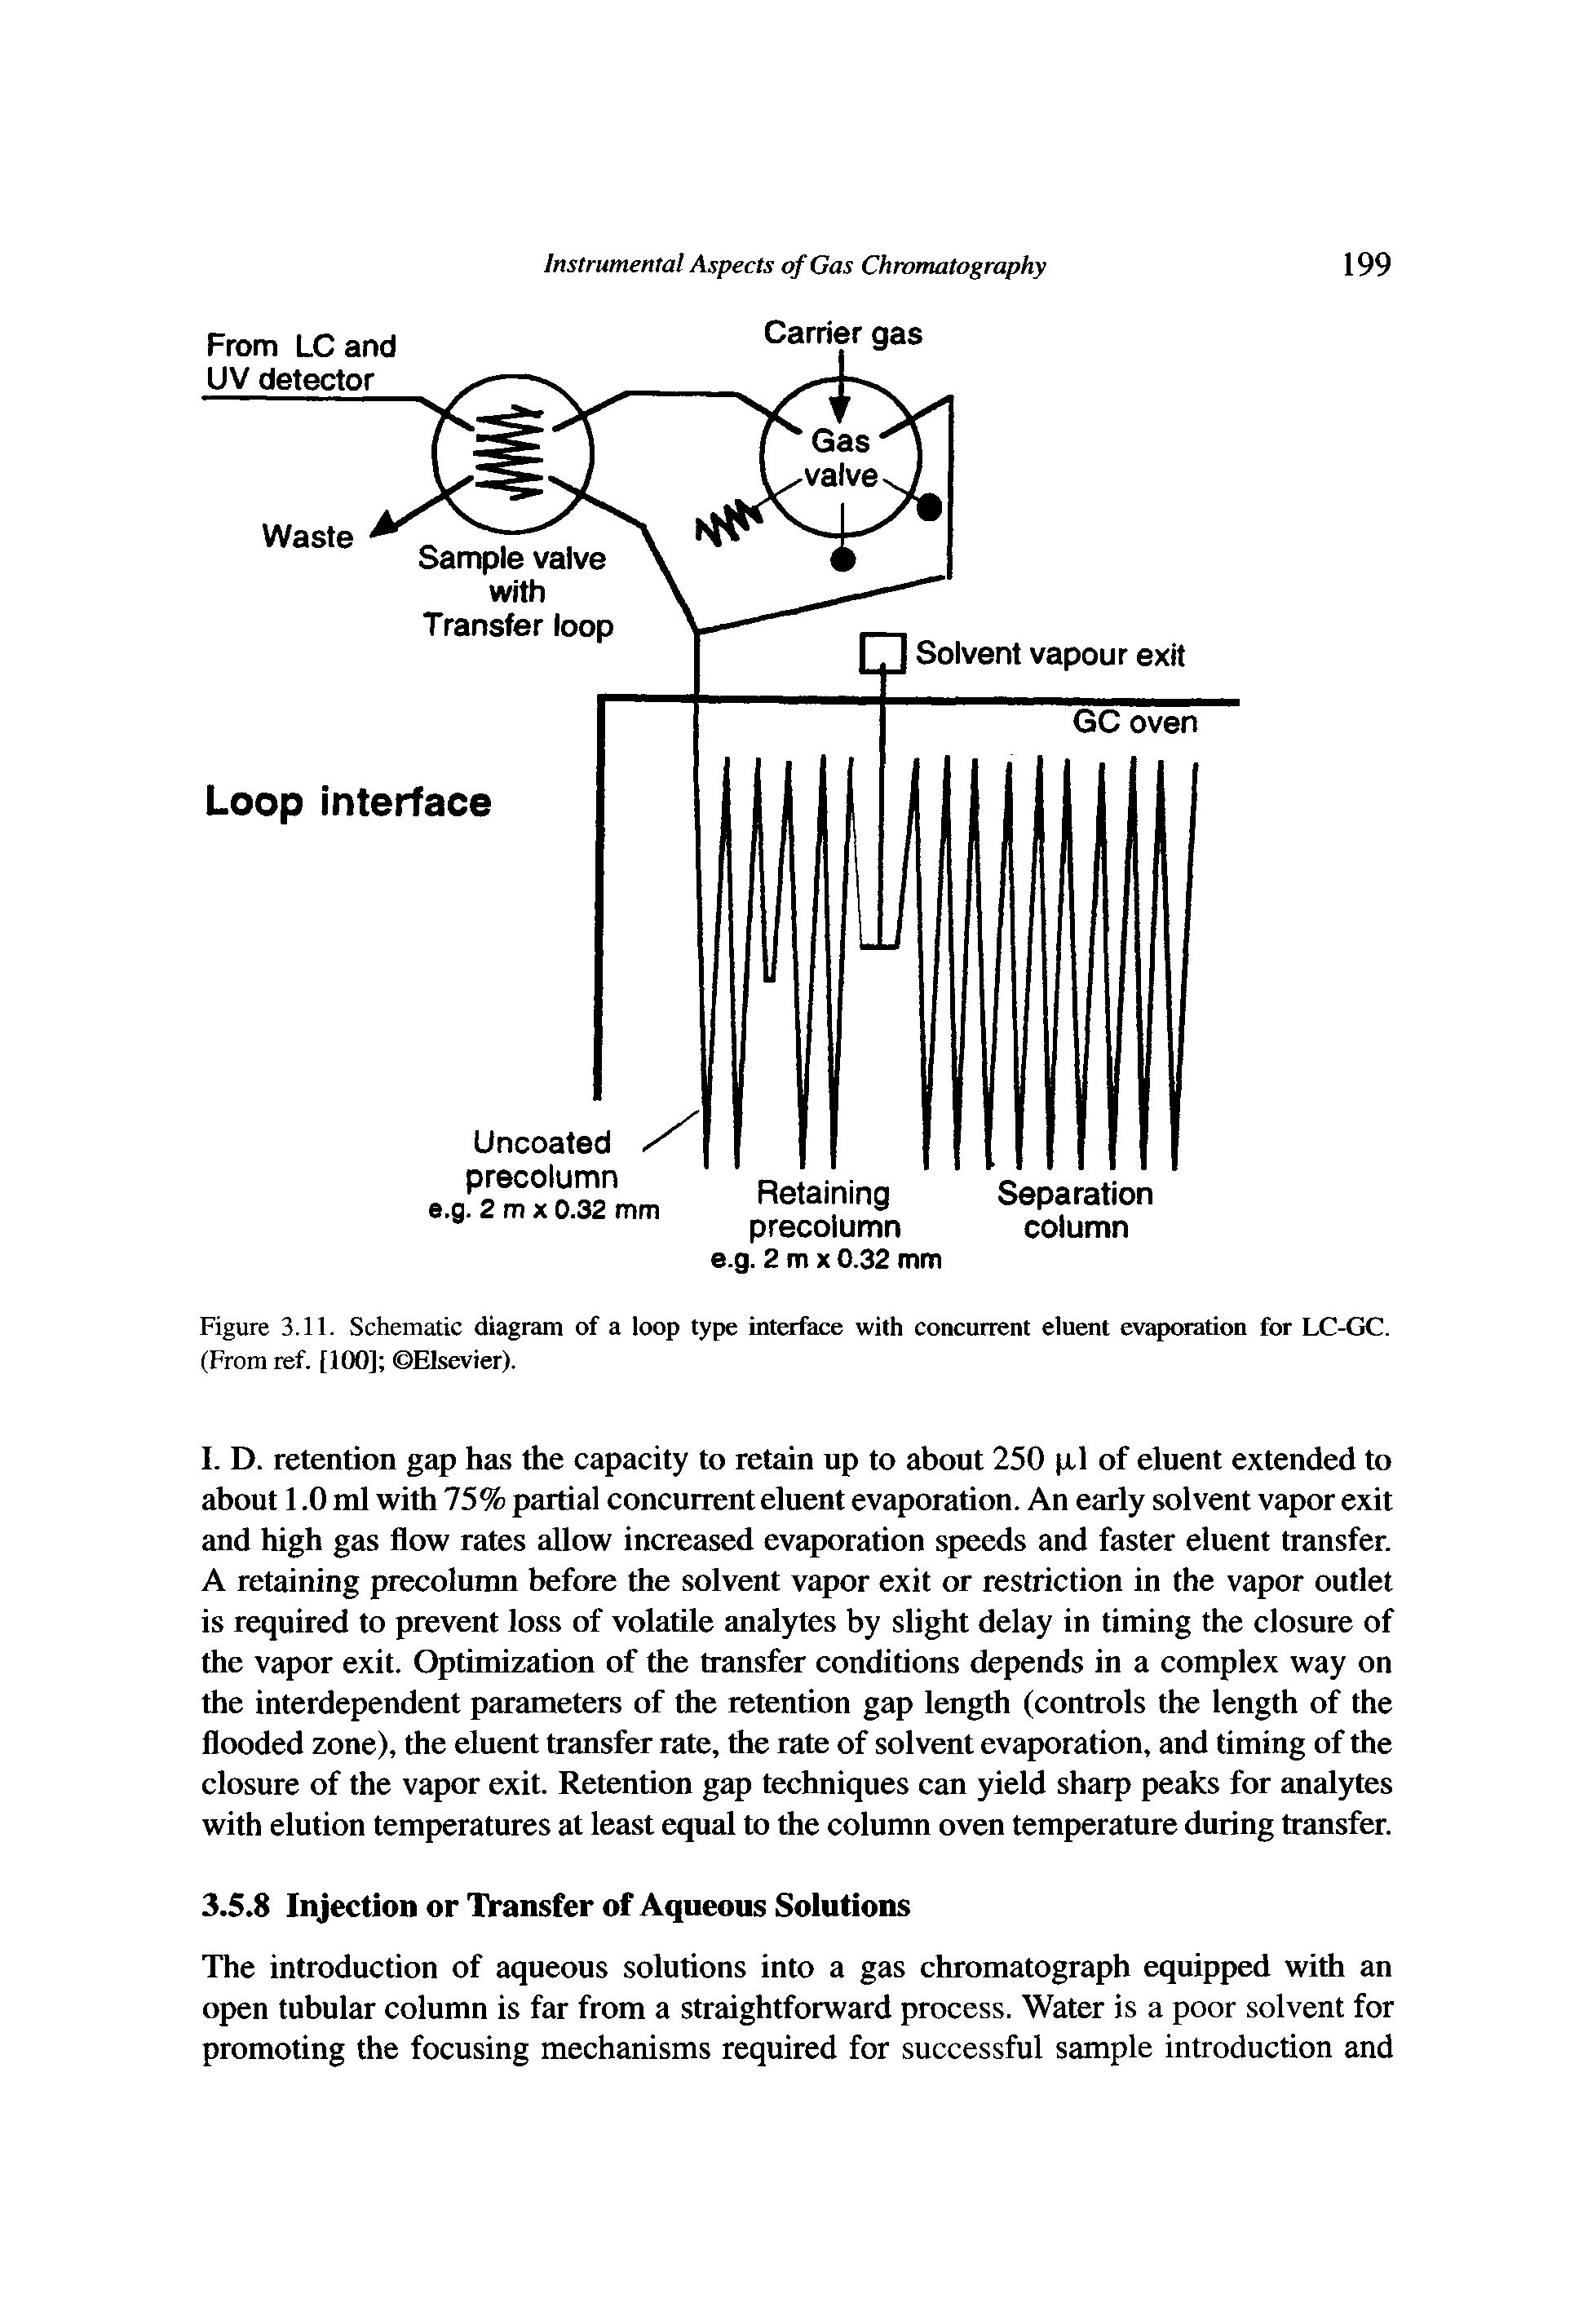 Figure 3.11. Schematic diagram of a loop type interface with concurrent eluent evaporation for LC-GC. (From ref. [100] Elsevier).